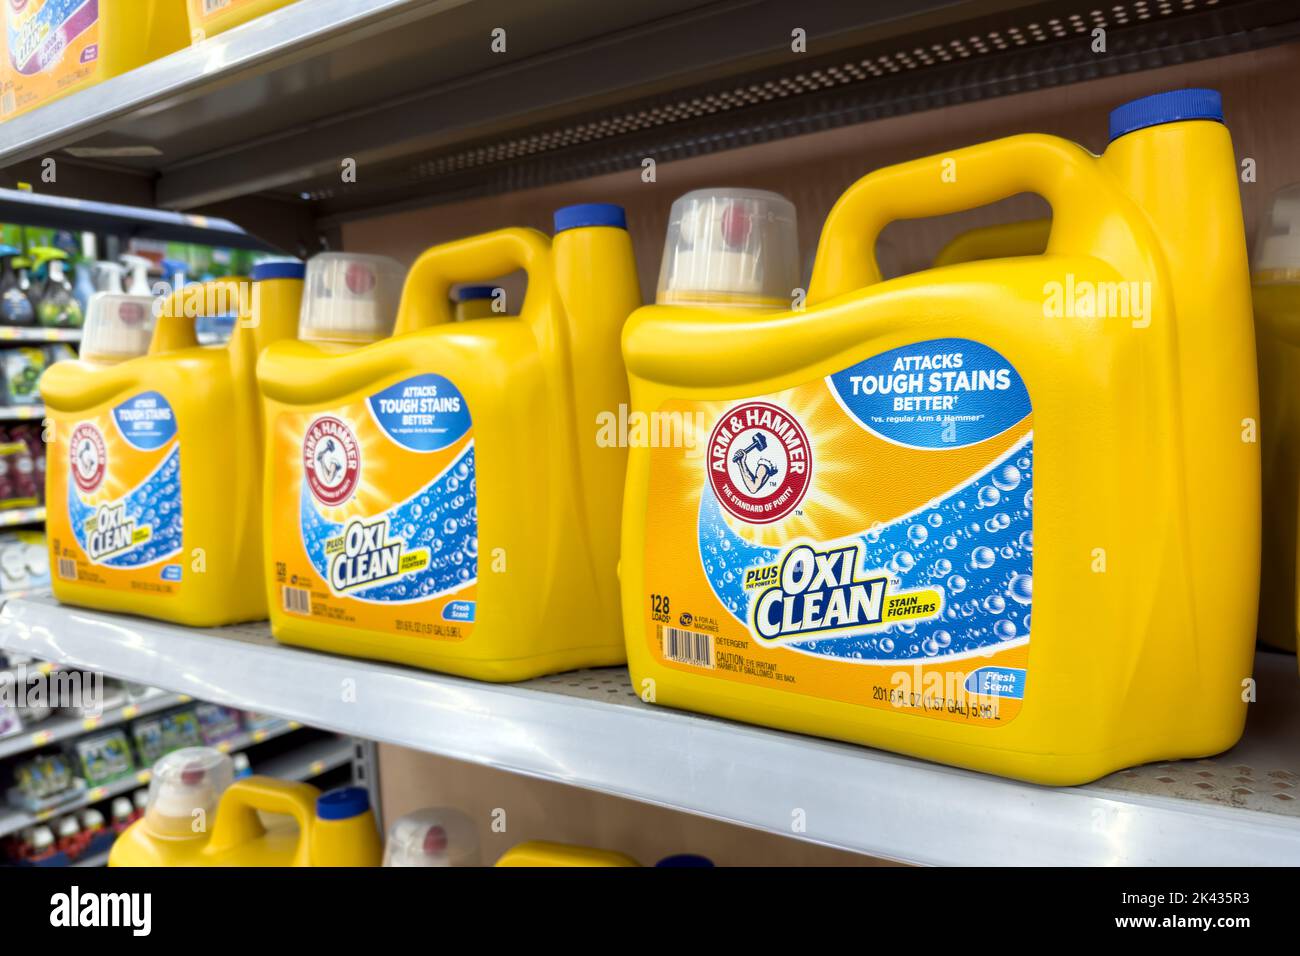 Novi, Michigan, United States - Sep 29, 2022: A view of several containers of Arm and Hammer laundry detergent at Walmart grocery store Stock Photo